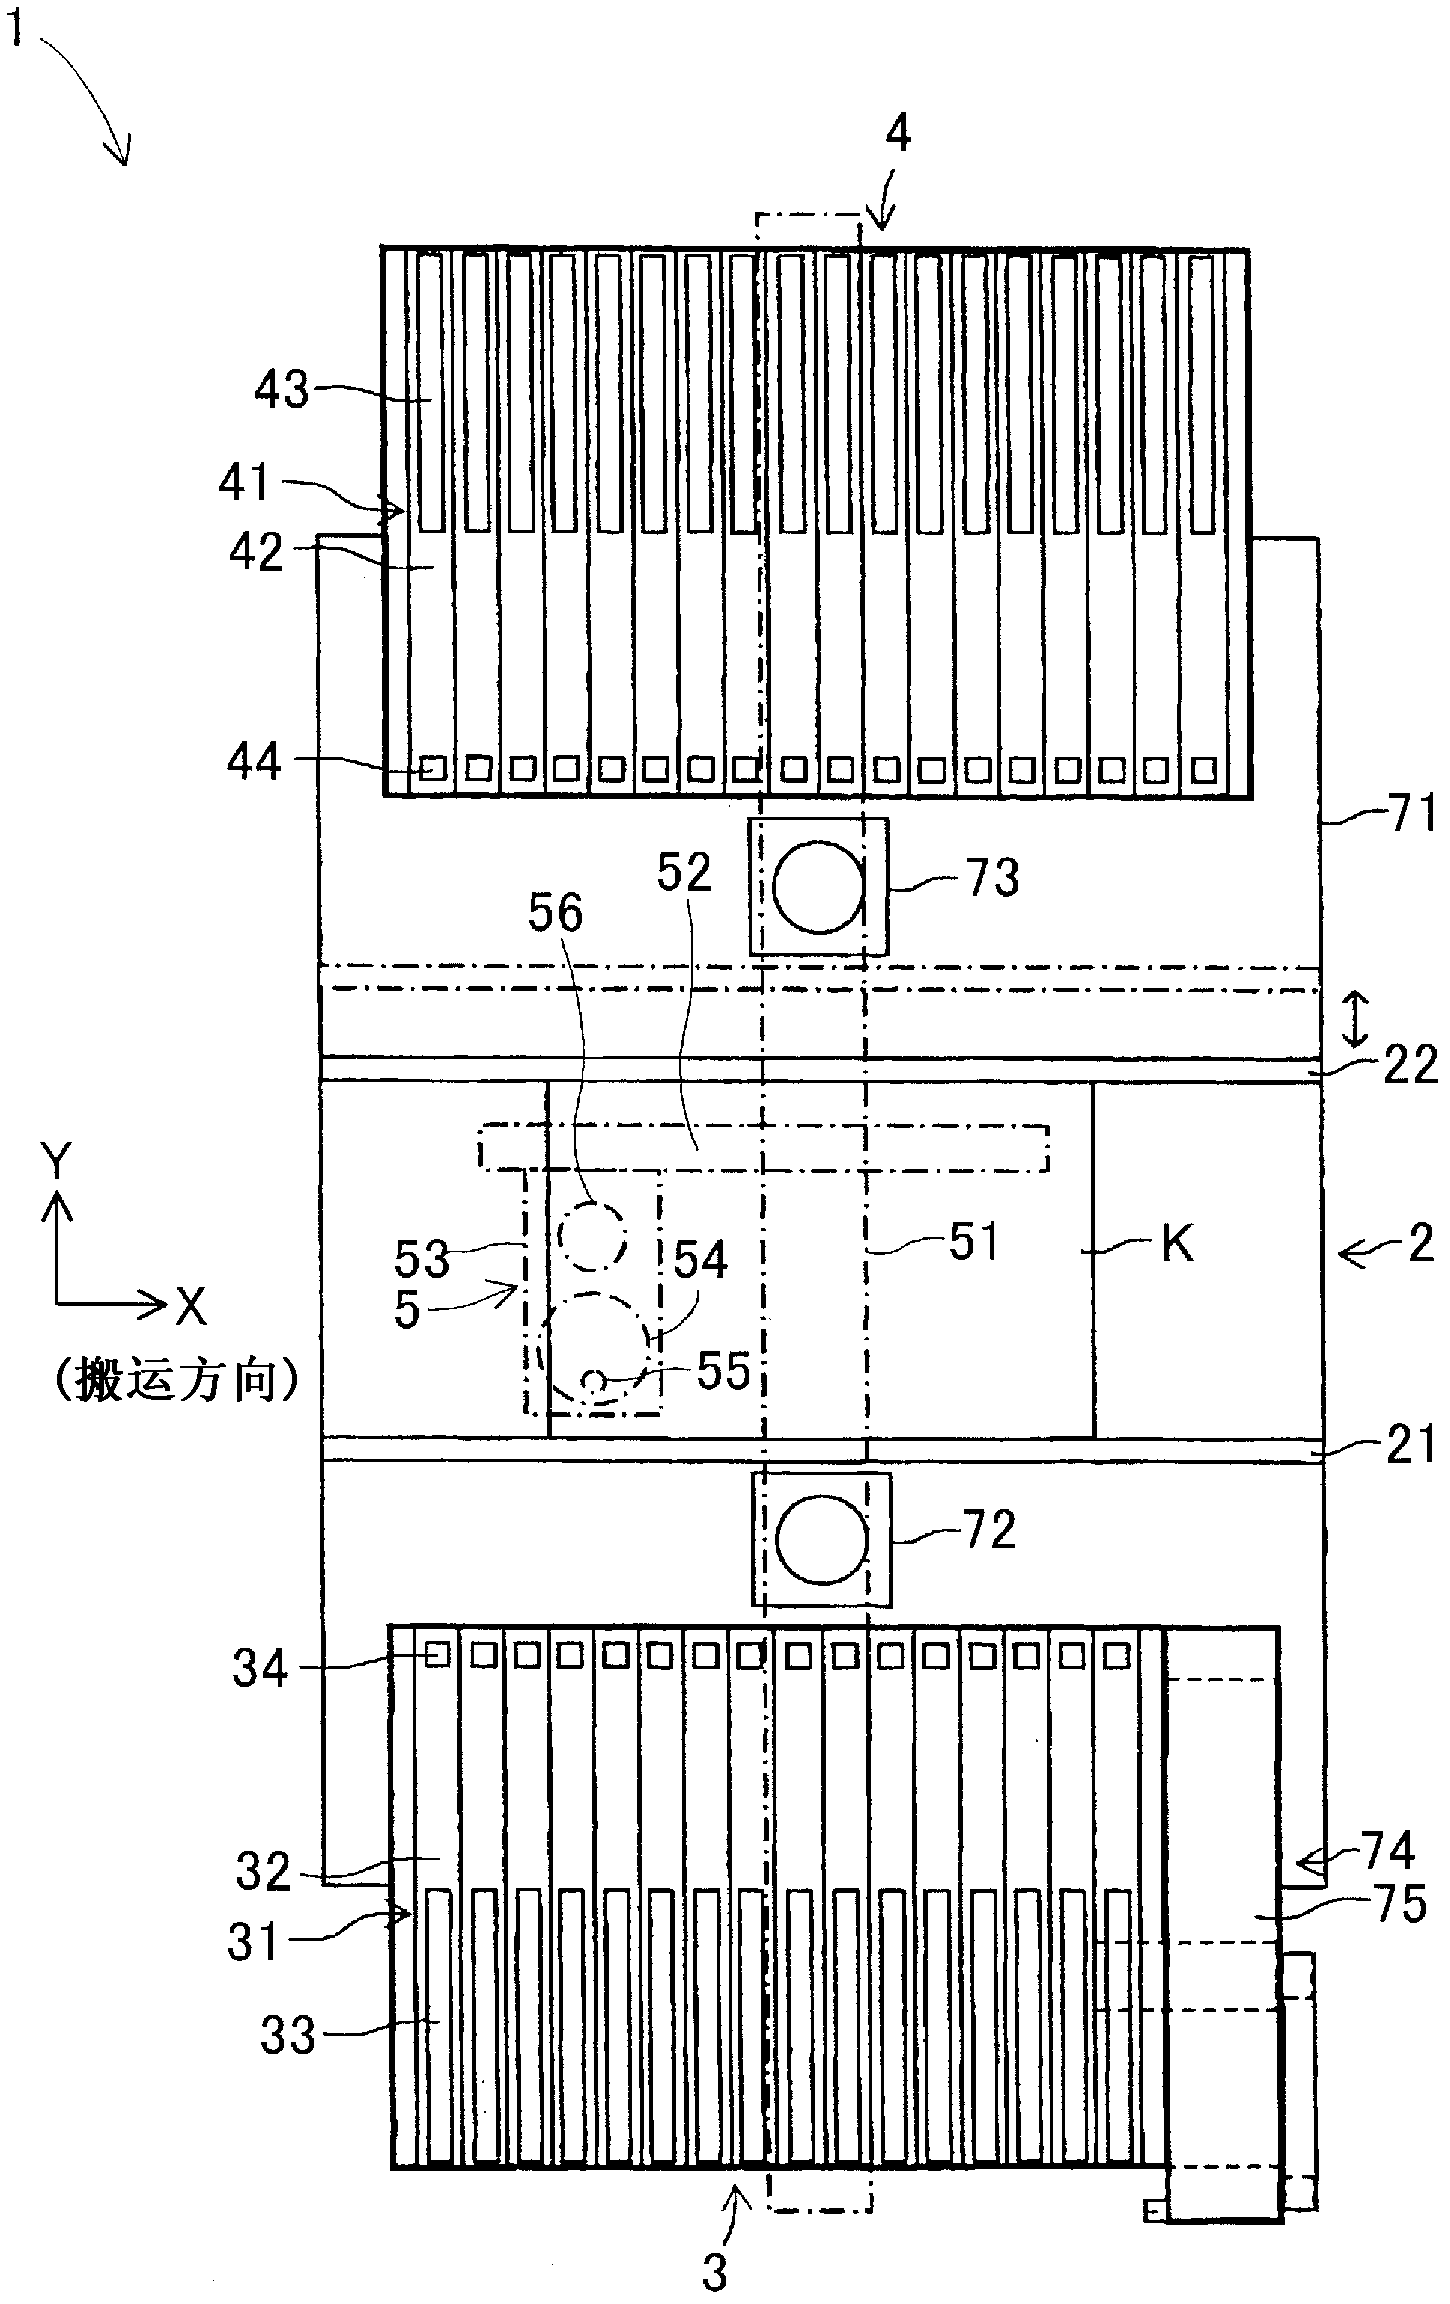 Part installation method of part assembly line